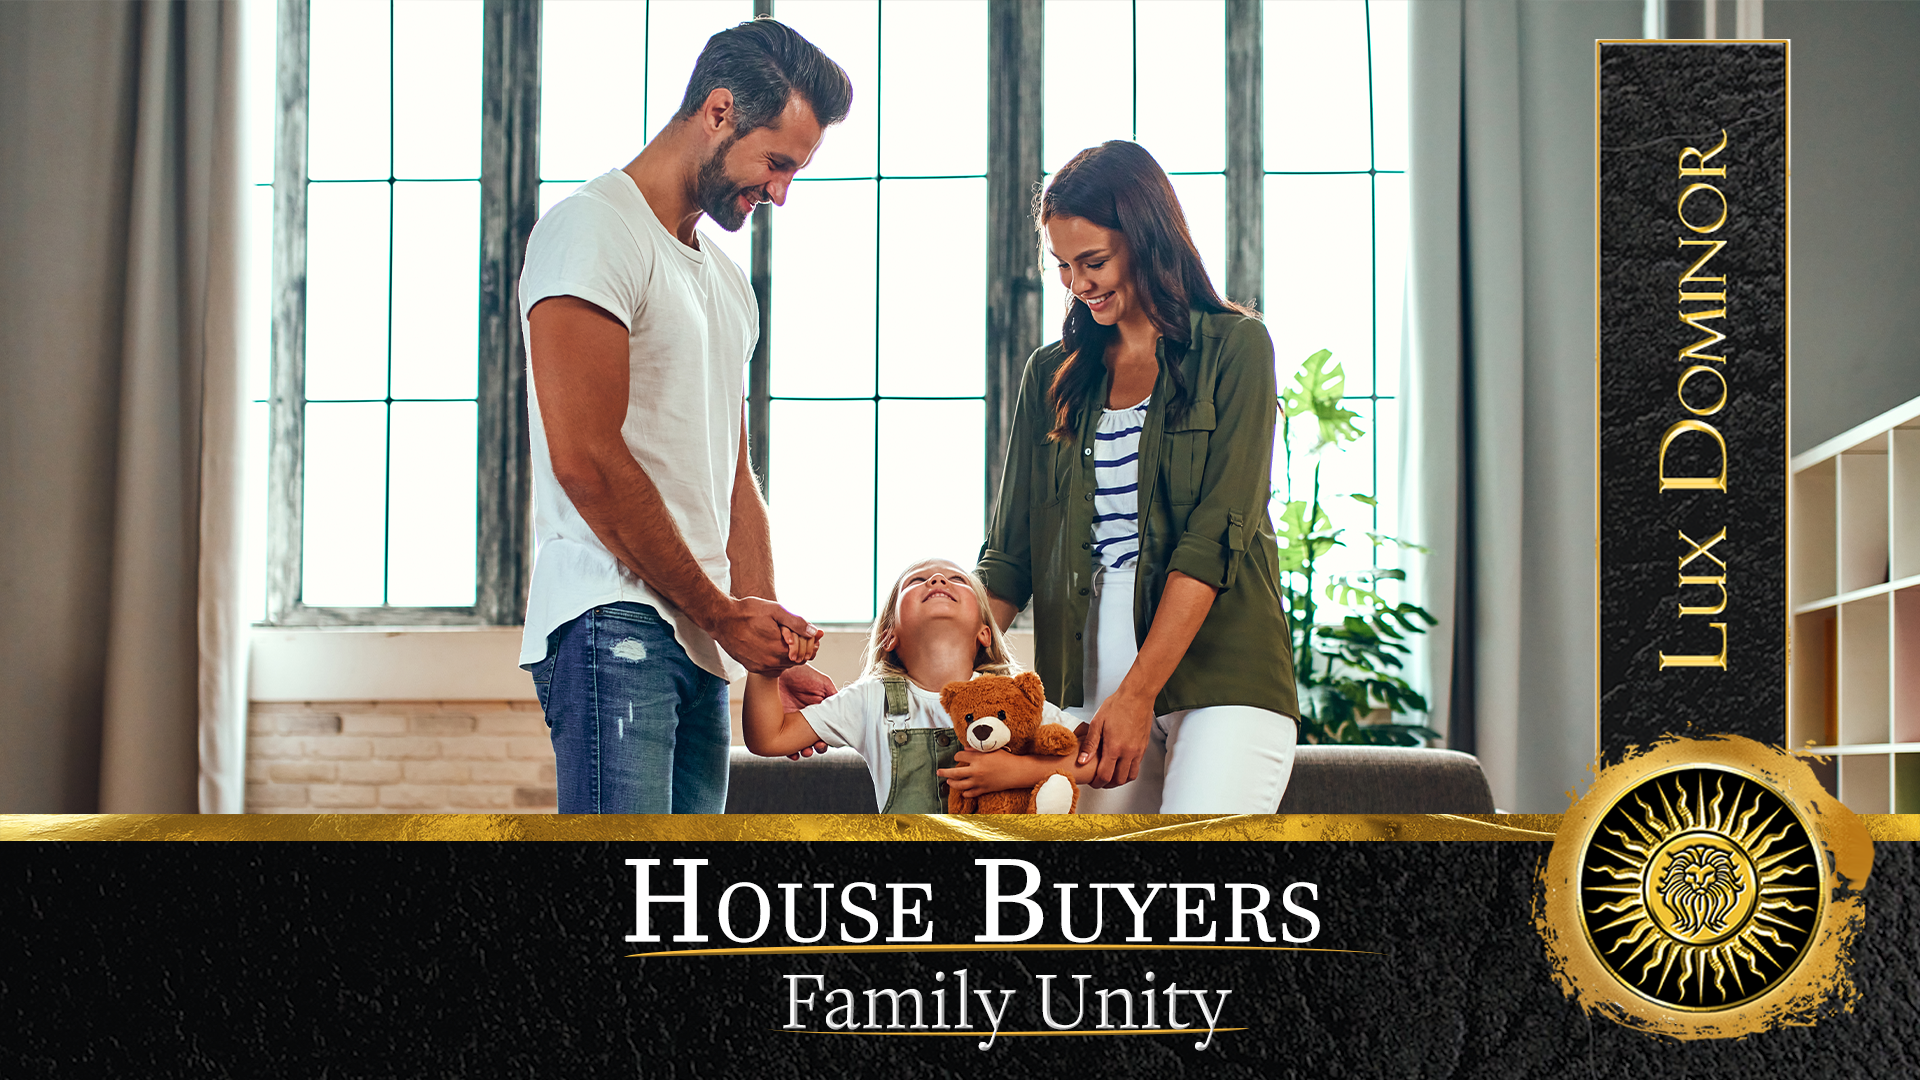 House Buyers For Family Unity - Cash Buyers In Houston Texas 2